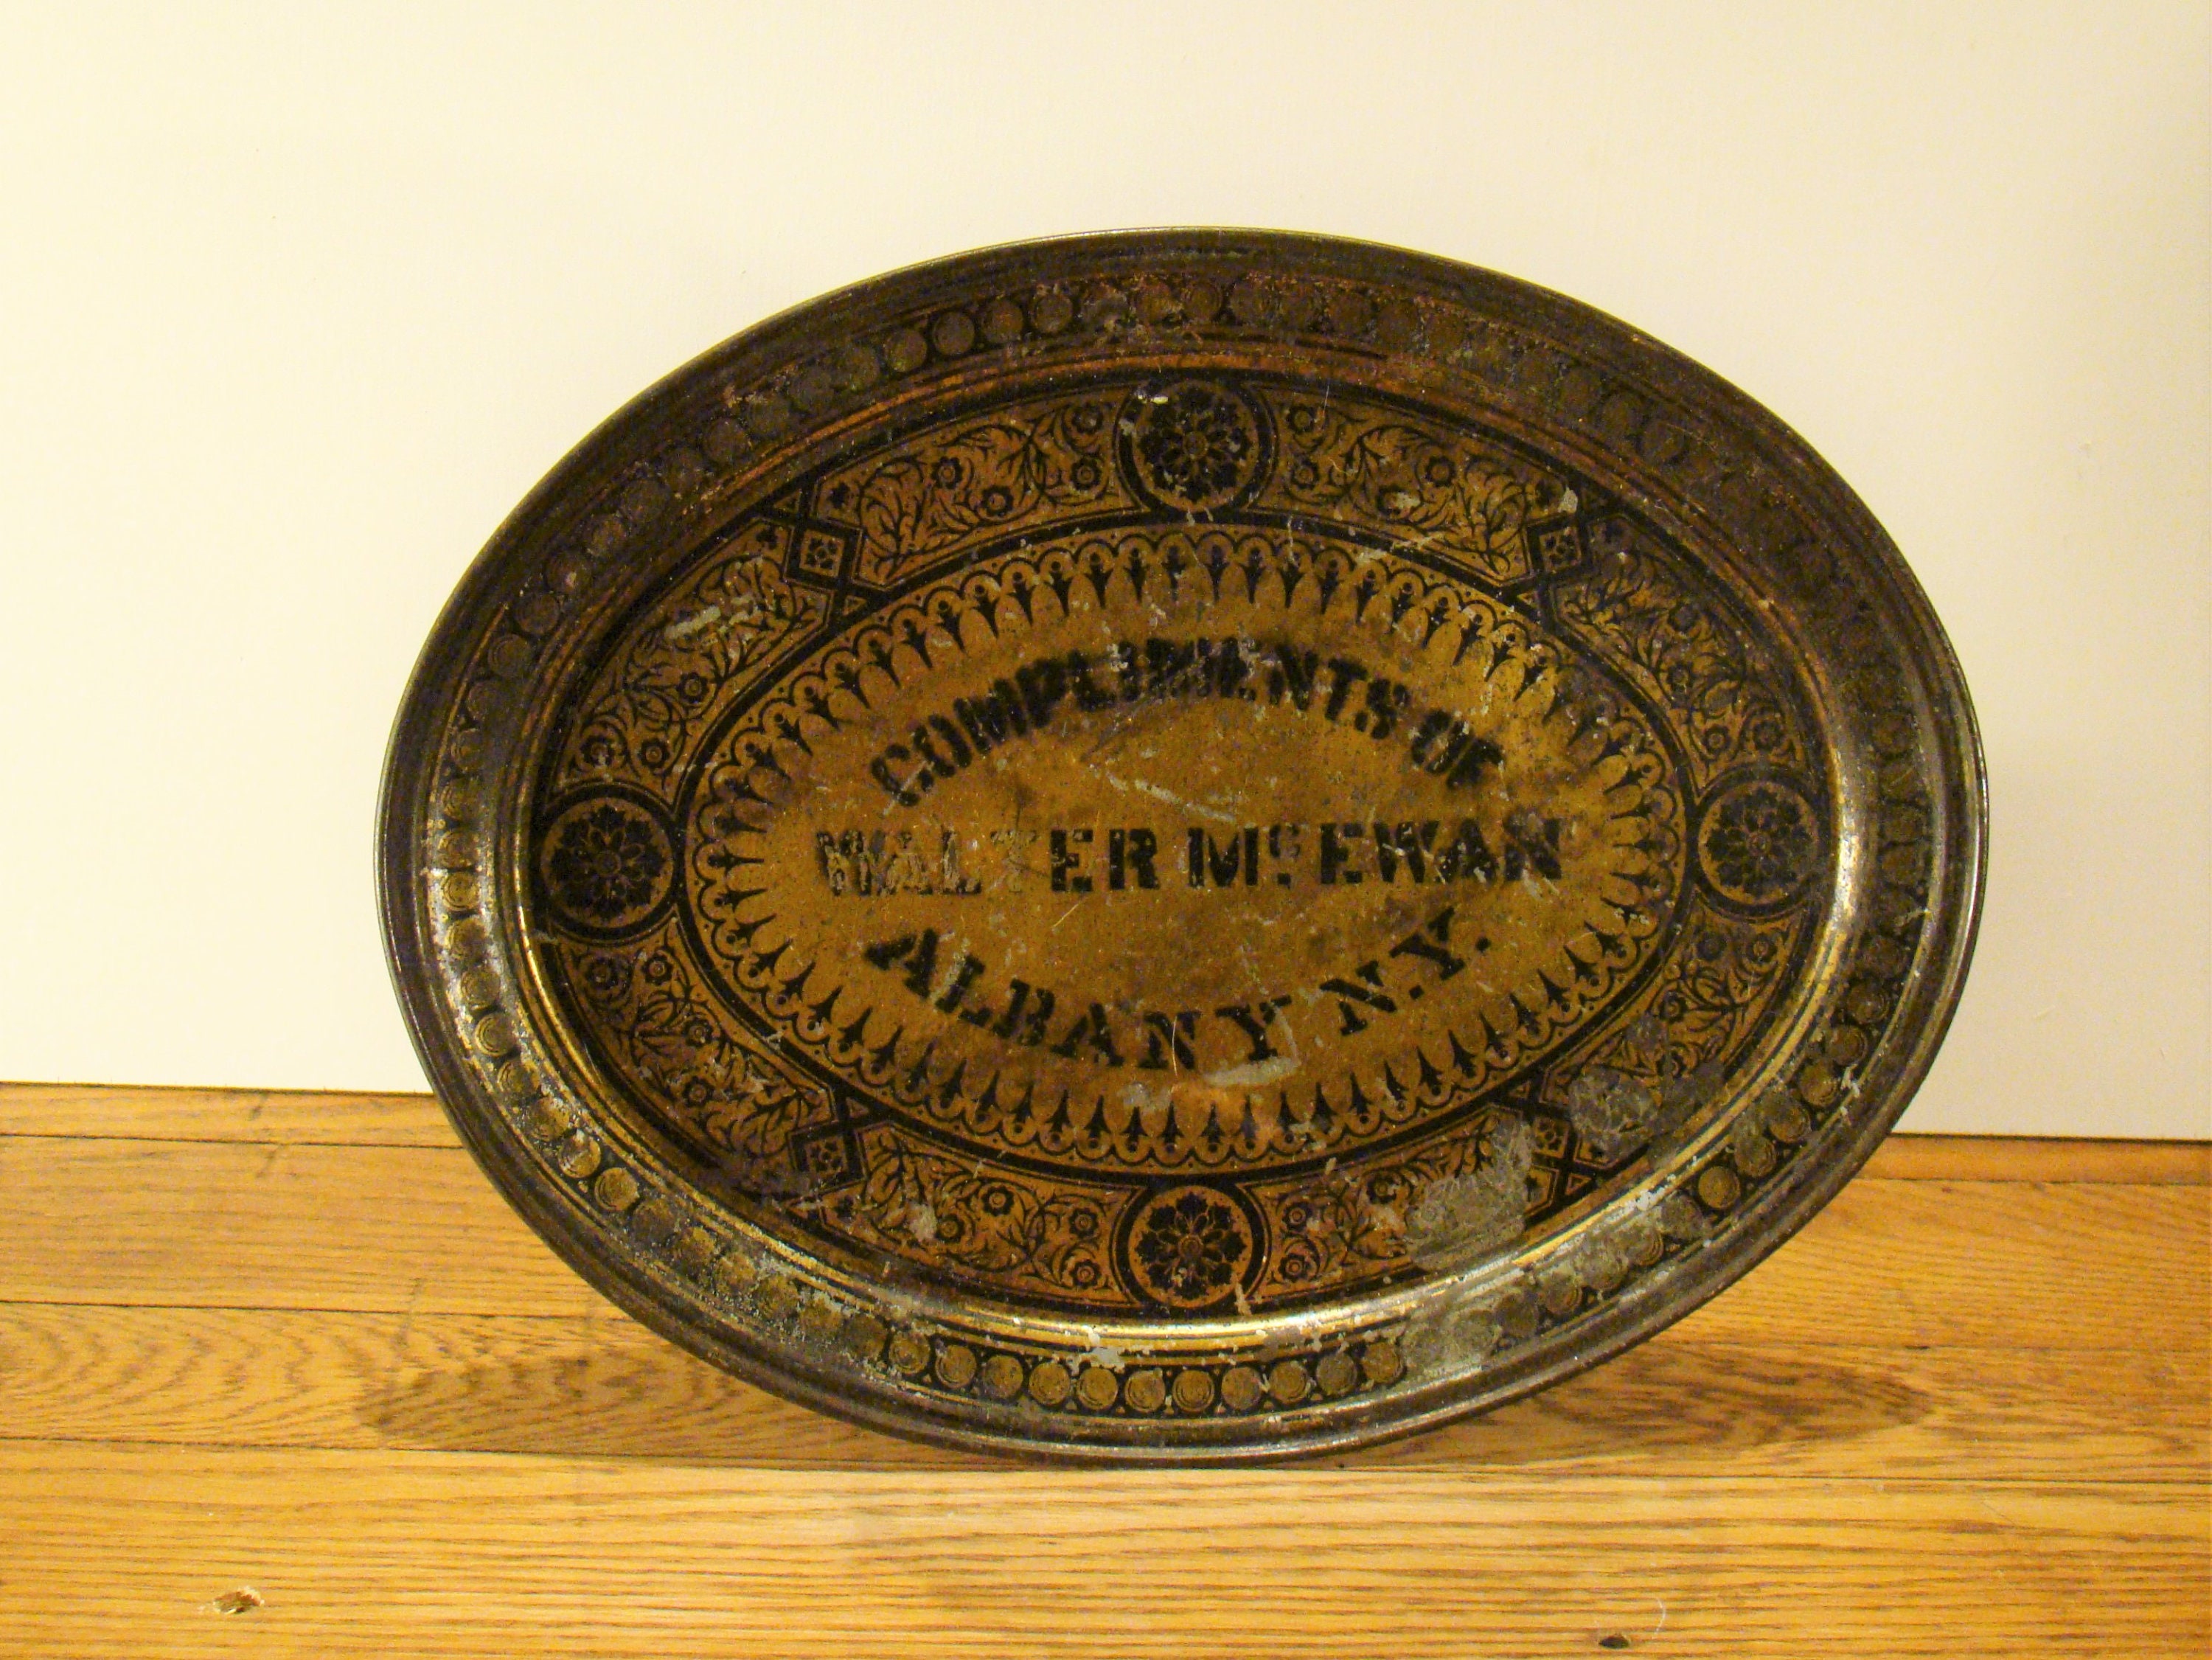 Vintage Metal Tray, Compliments Of Walter Mcewan, Plateau Ovale, Albany Ny